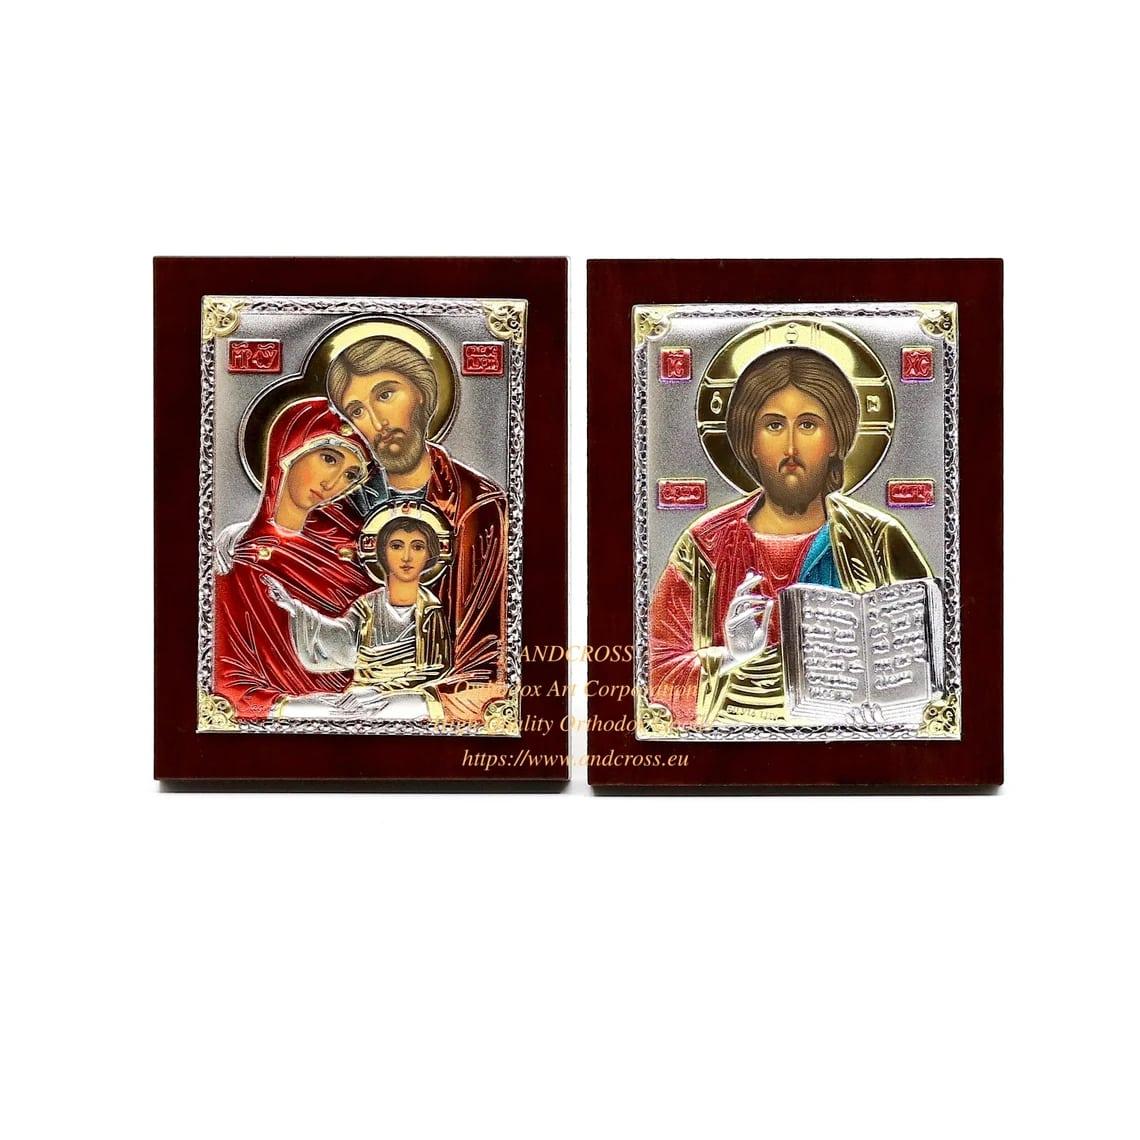 Silver Plated .999 Orthodox Icons Holy Family